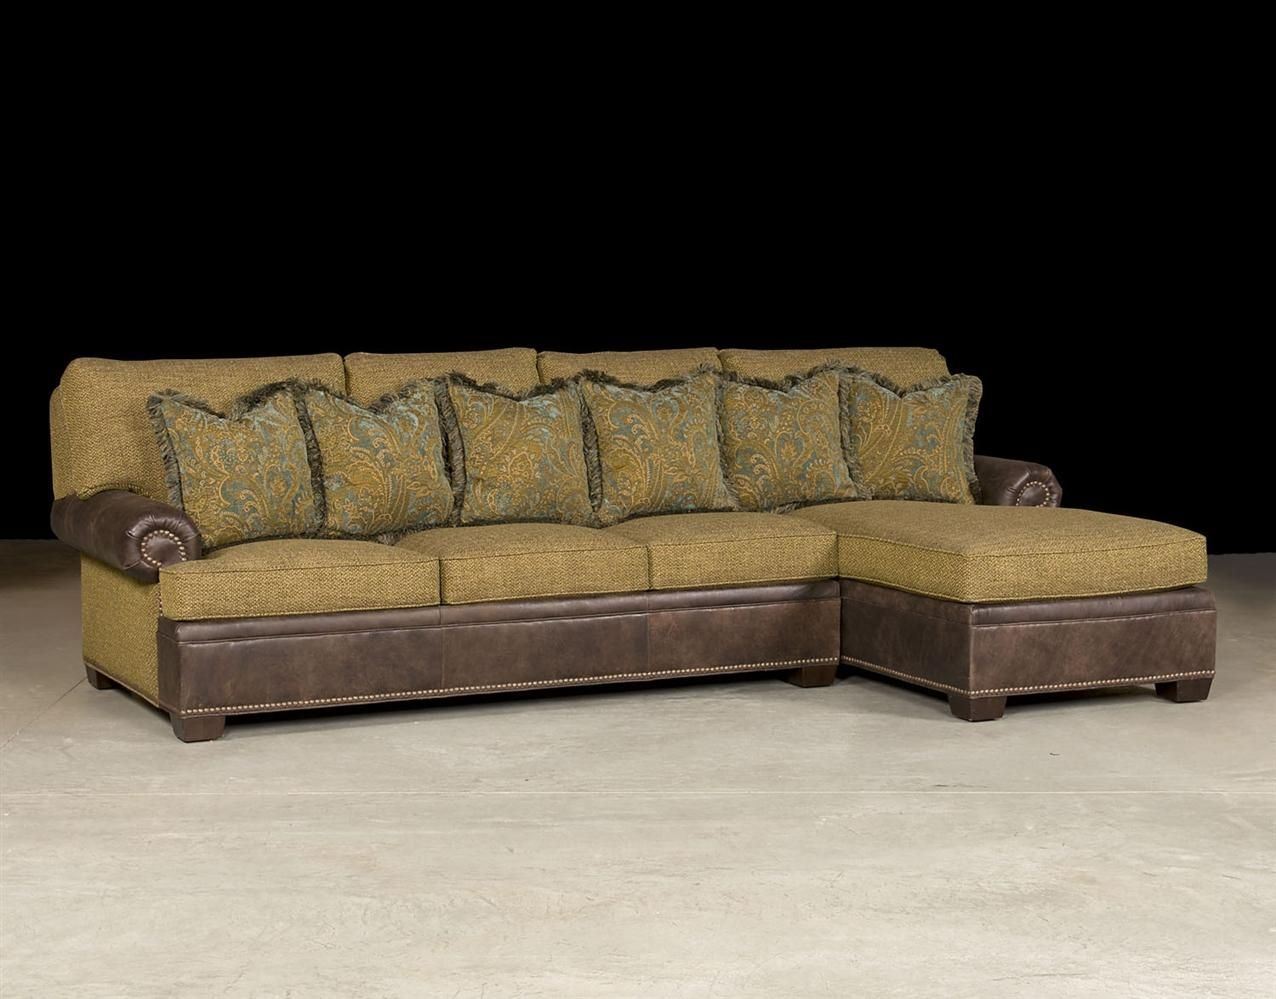 Vintage Leather Sectional With Chaise | : Decorate For Leather With Regard To Vintage Leather Sectional Sofas (View 3 of 20)